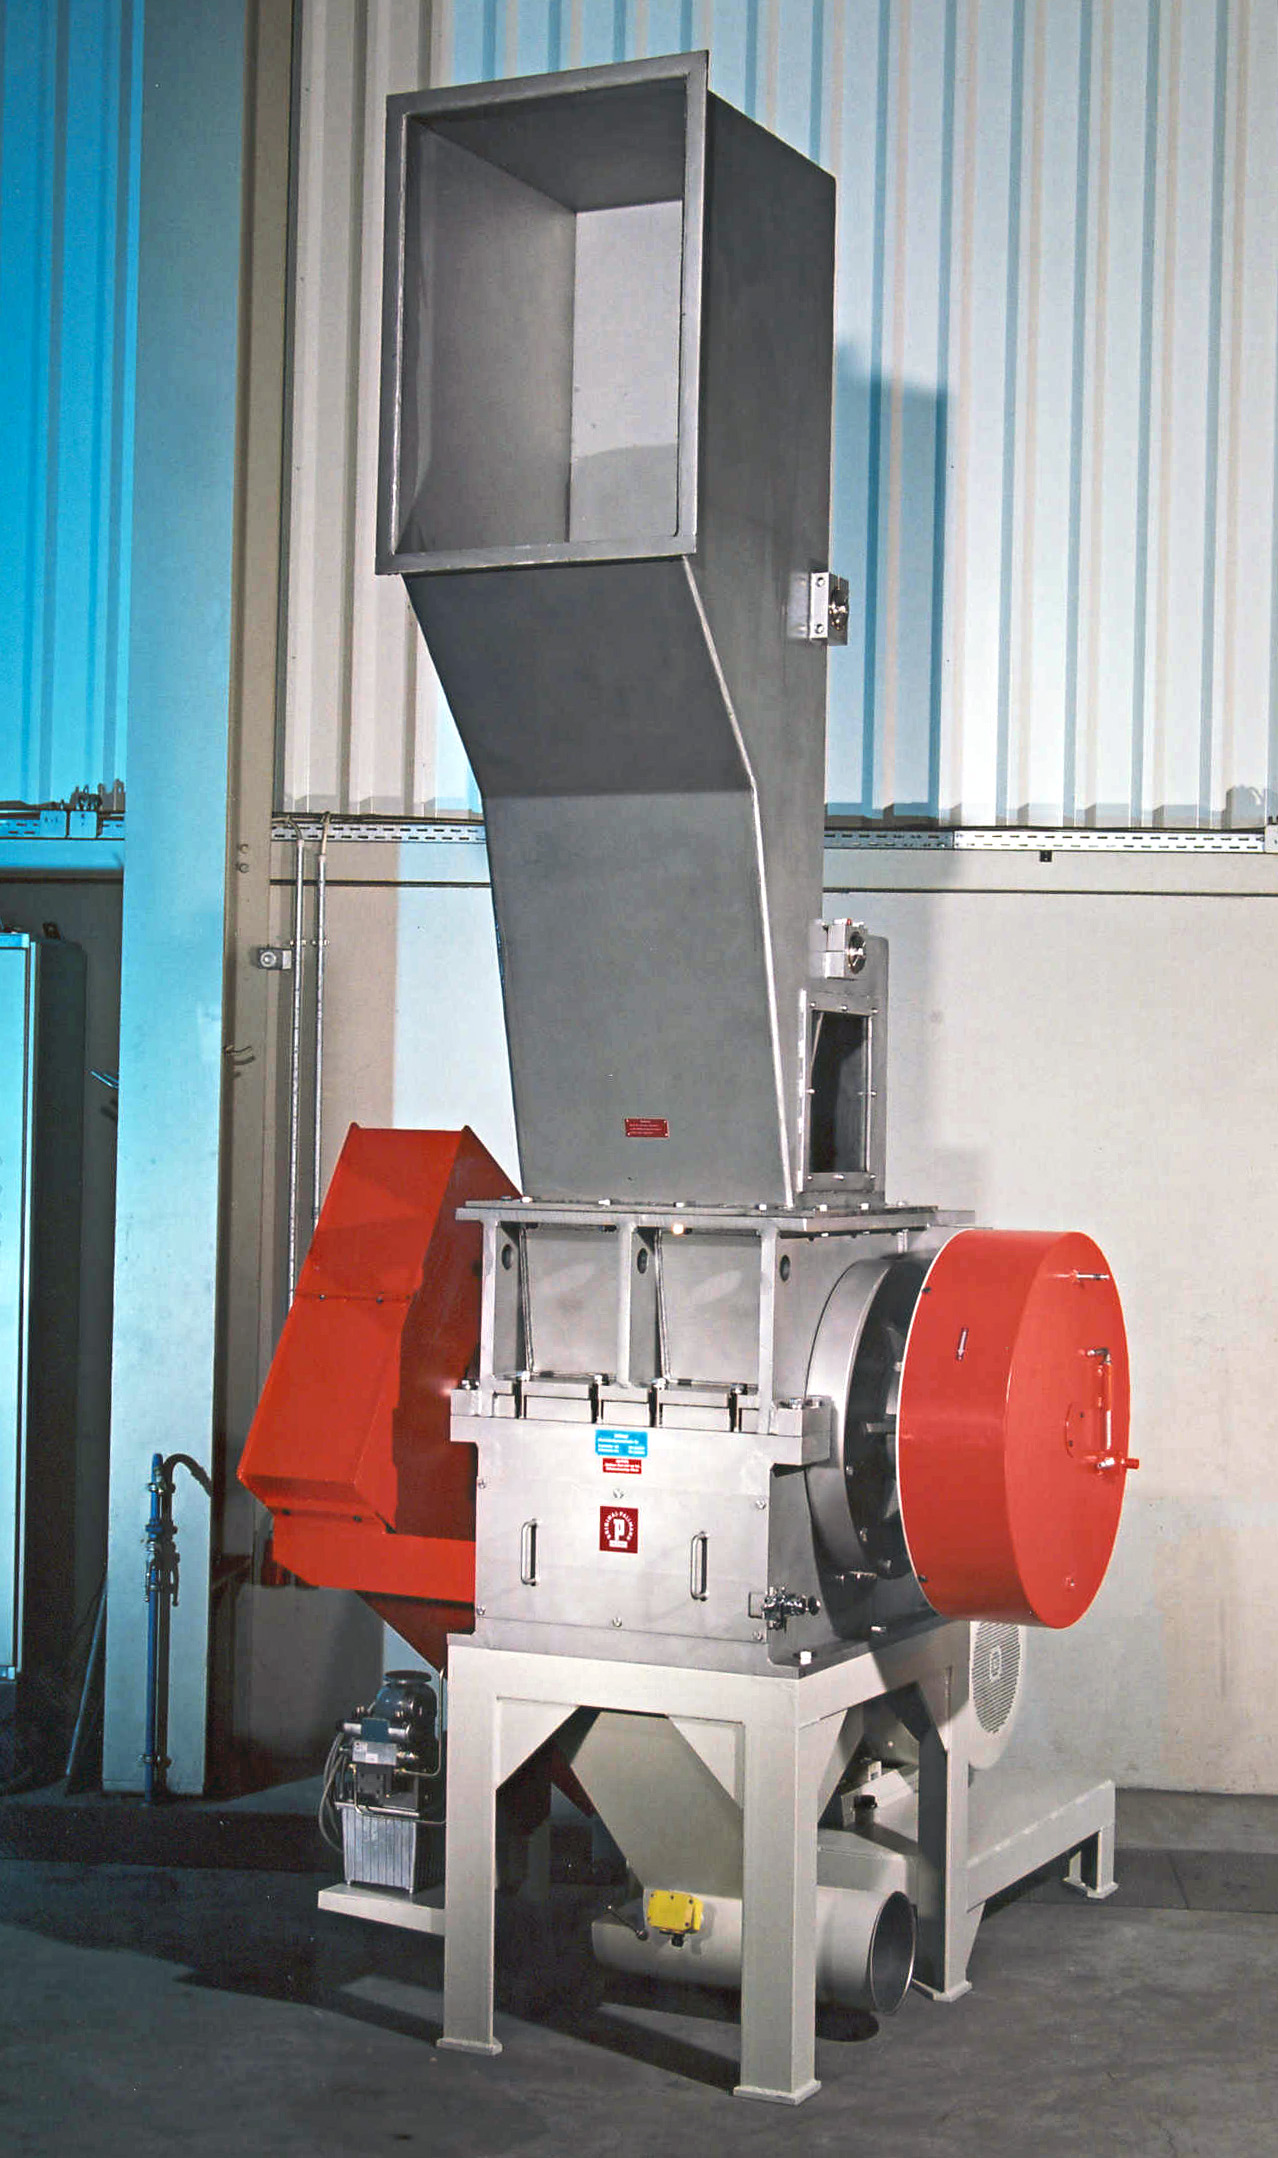 Knife mill for Rubber594a2d3be8b066.38189089.jpg